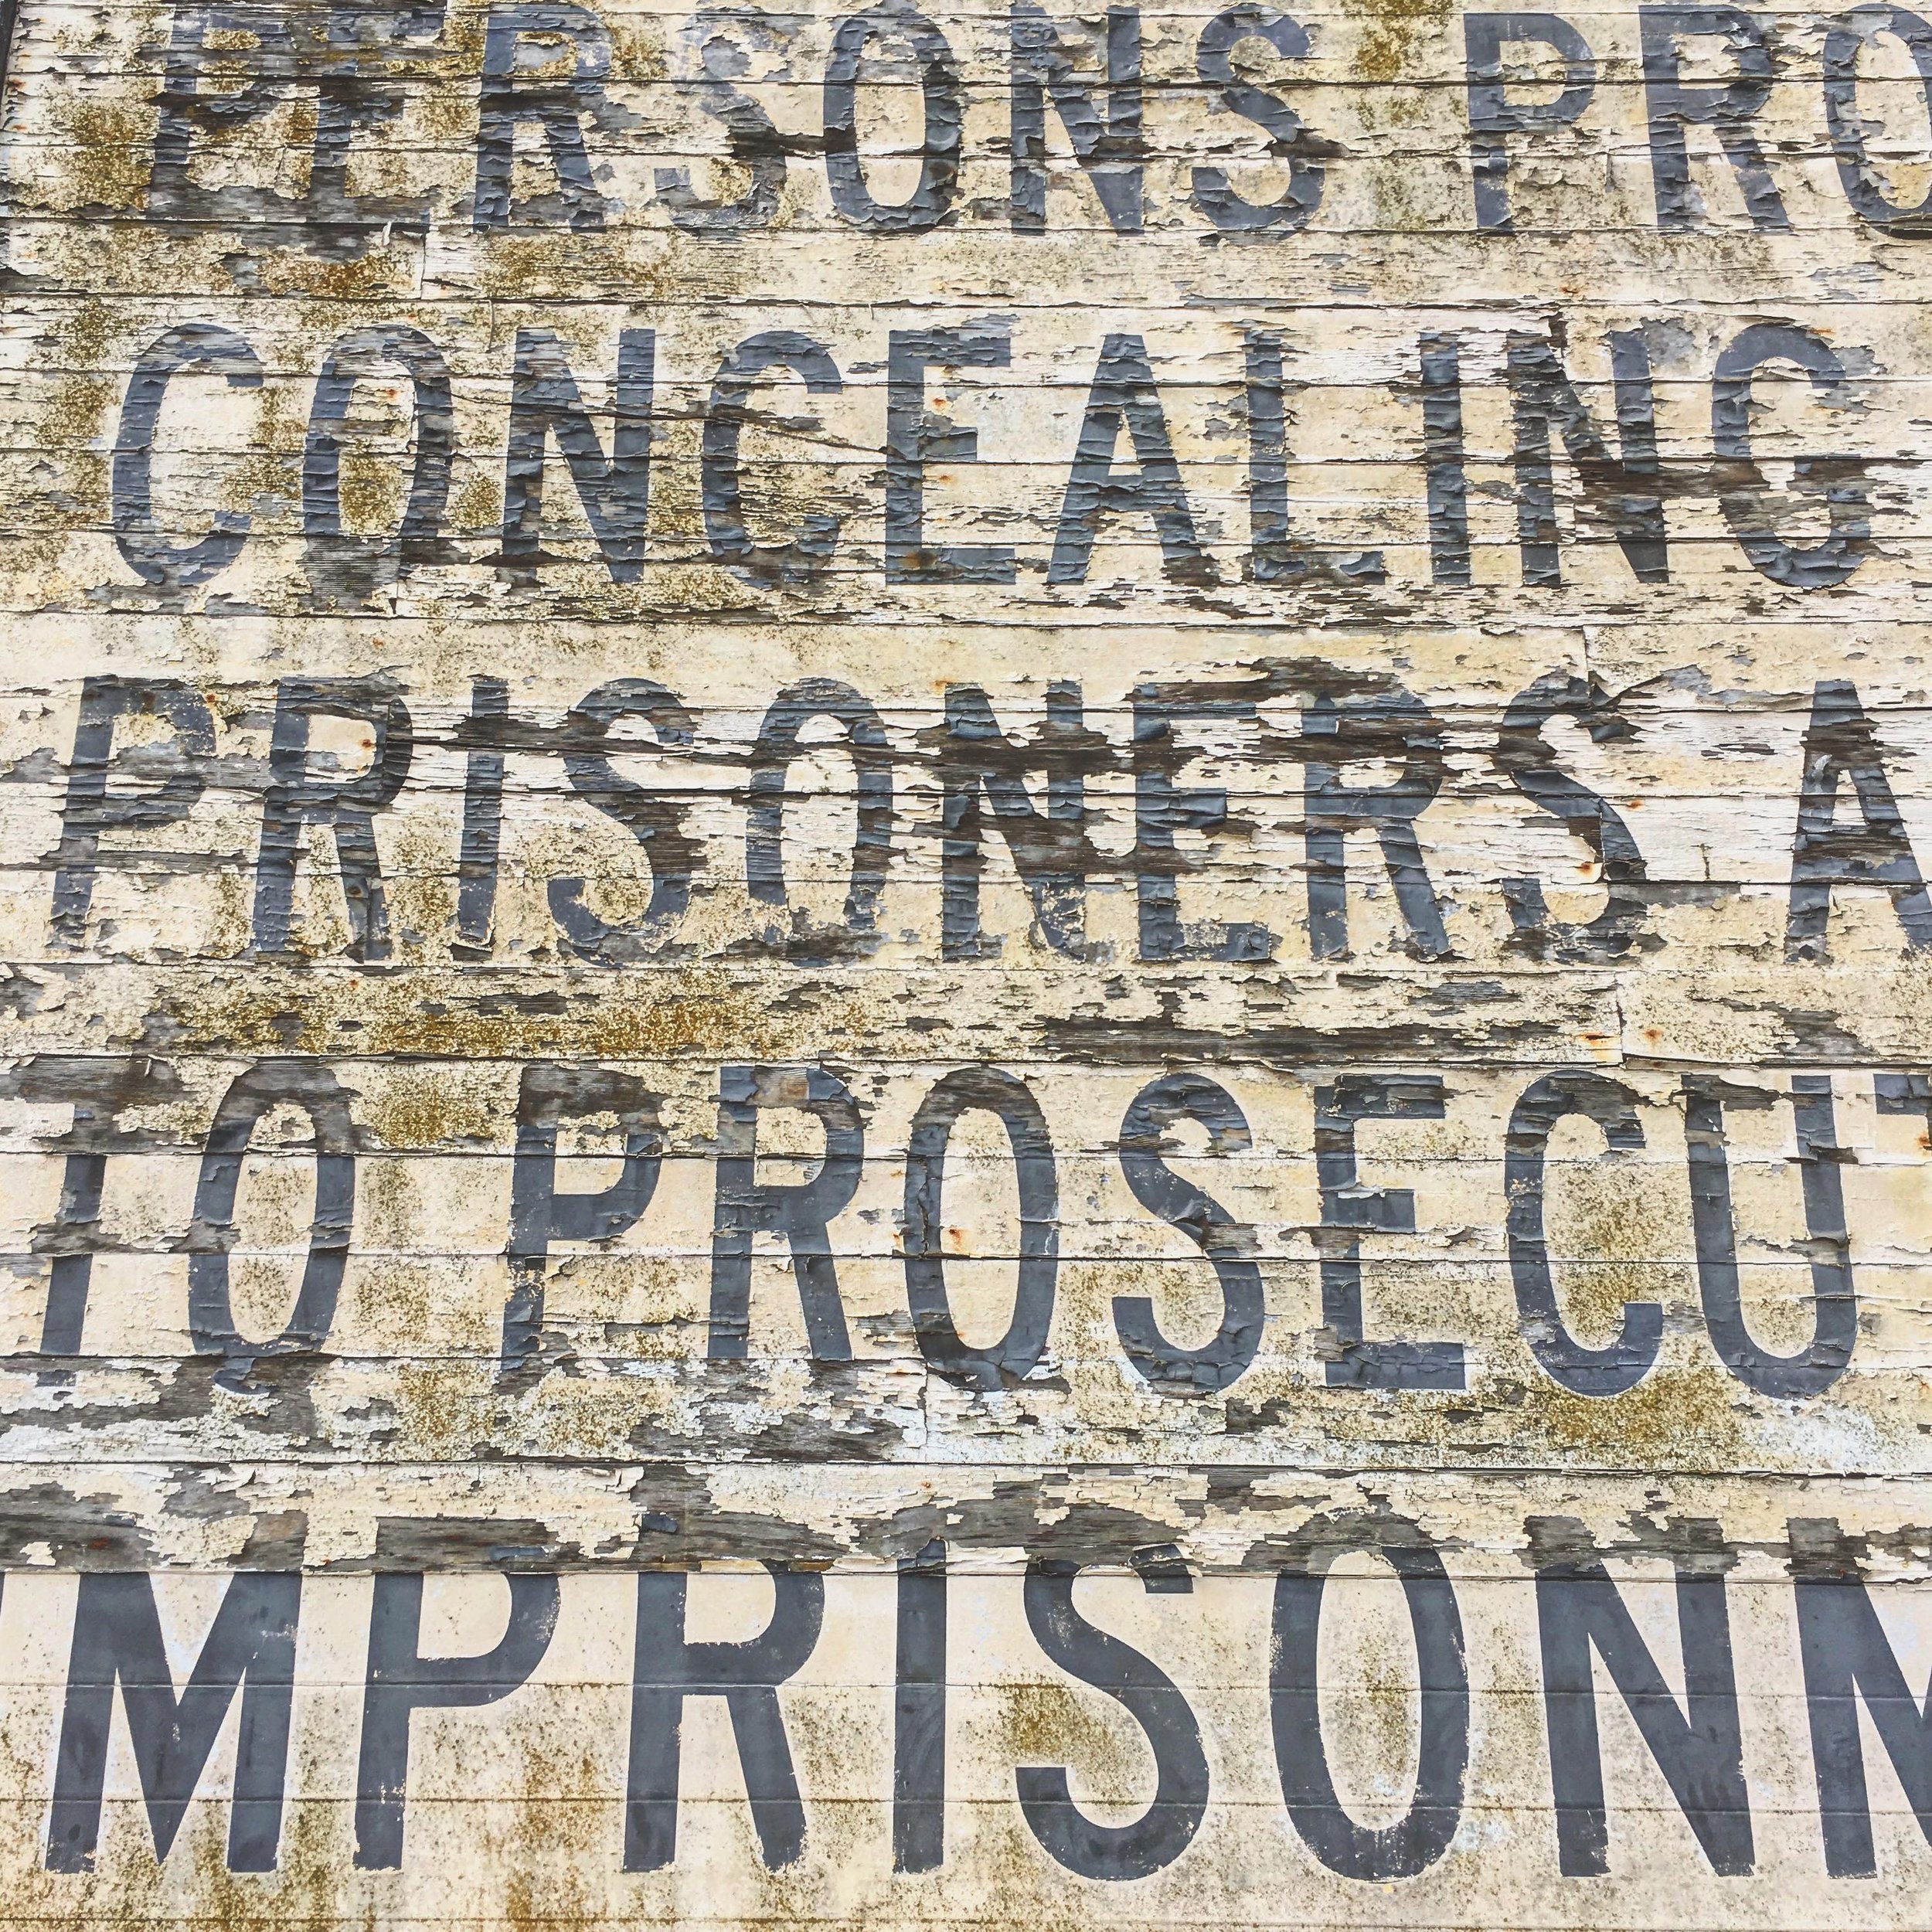 One of my favourite pass times.

Taking photos of old ghost signs.

This one a few years back on Alcatraz (tourist not convict)

#signspotting #london #ghostsigns #alkatraz #signage #wayfinding #sanfrancisco #inspiration #handpainted #lettering #inst